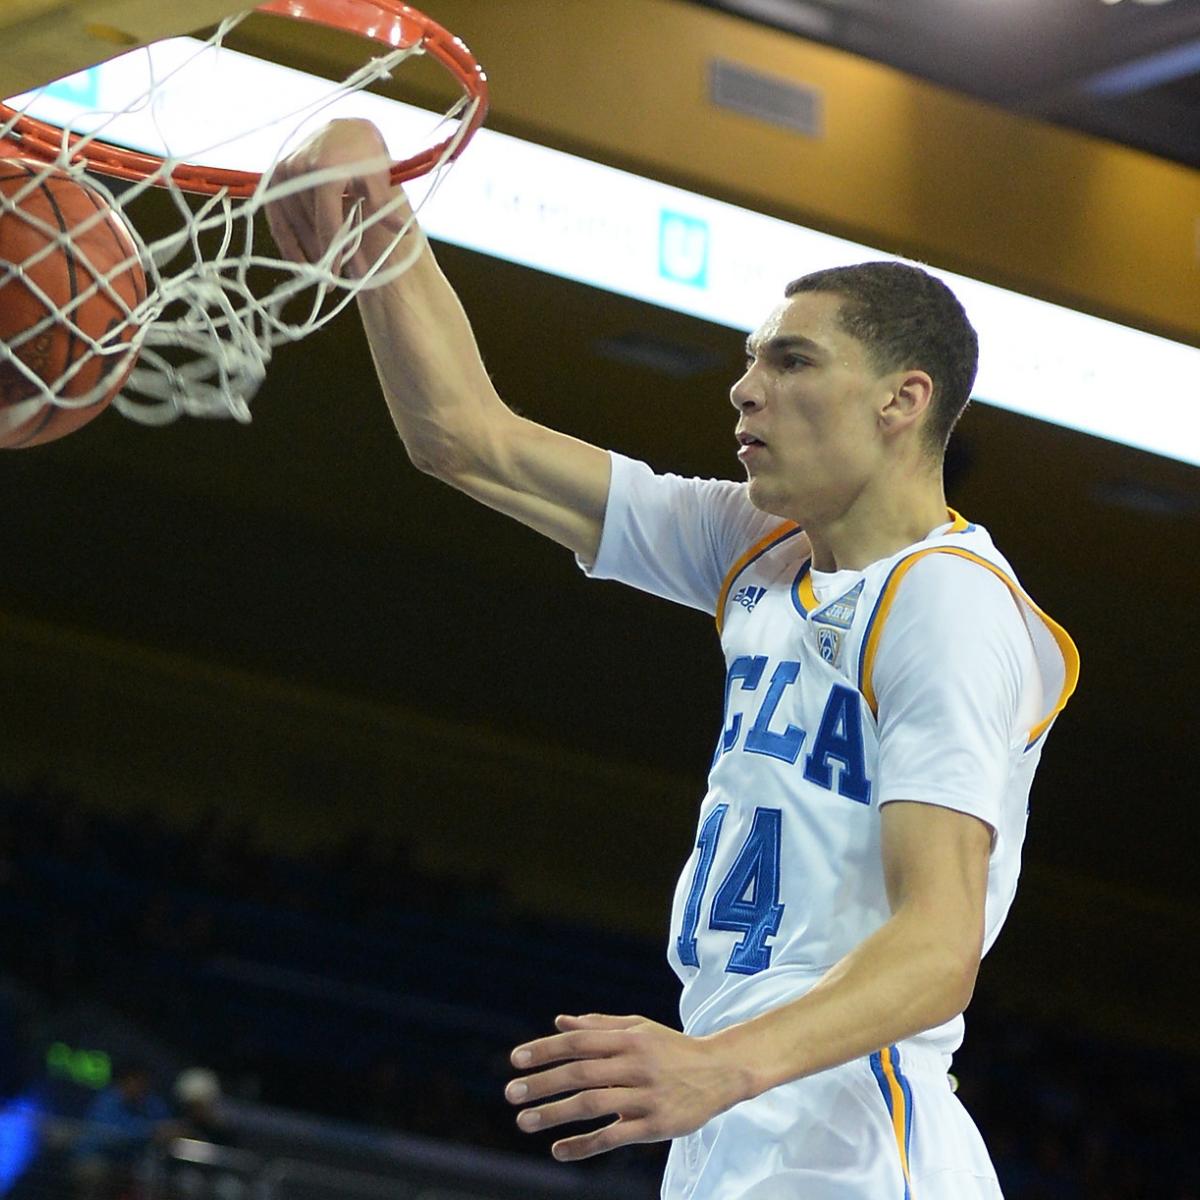 Zach LaVine NBA Draft 2014: Highlights, Scouting Report for ...